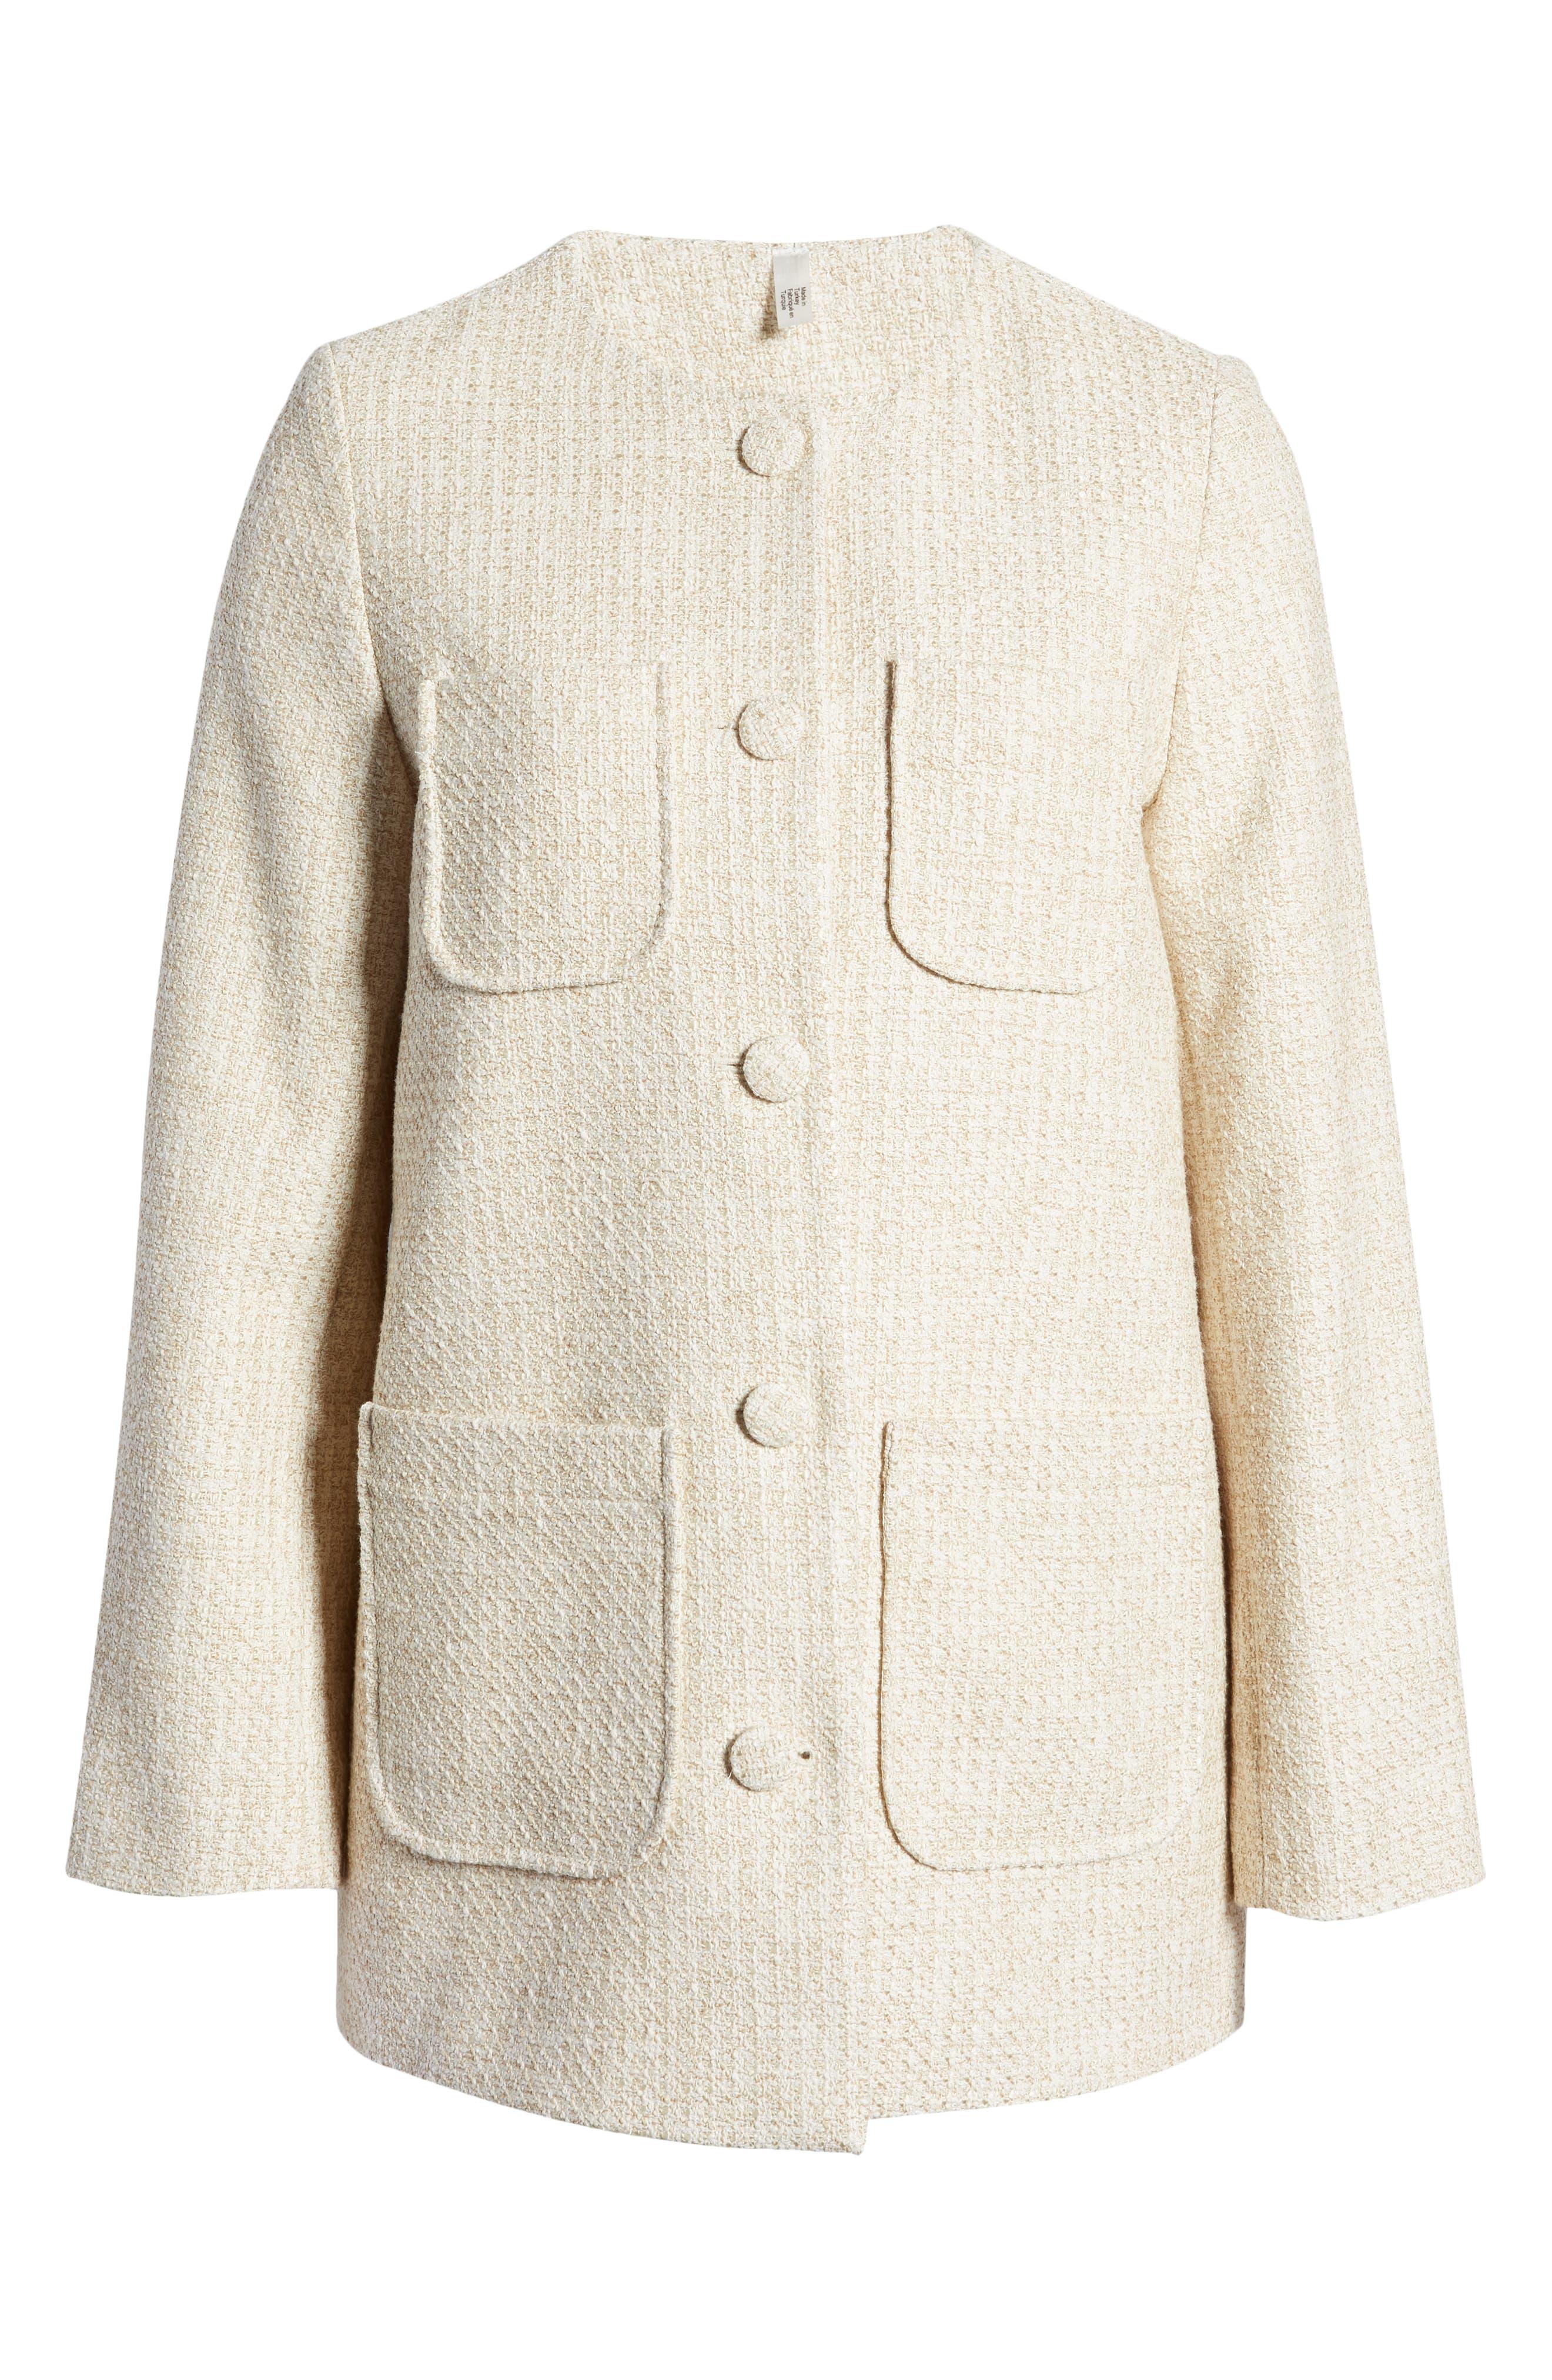 & Other Stories & Collarless Tweed Jacket in Natural | Lyst